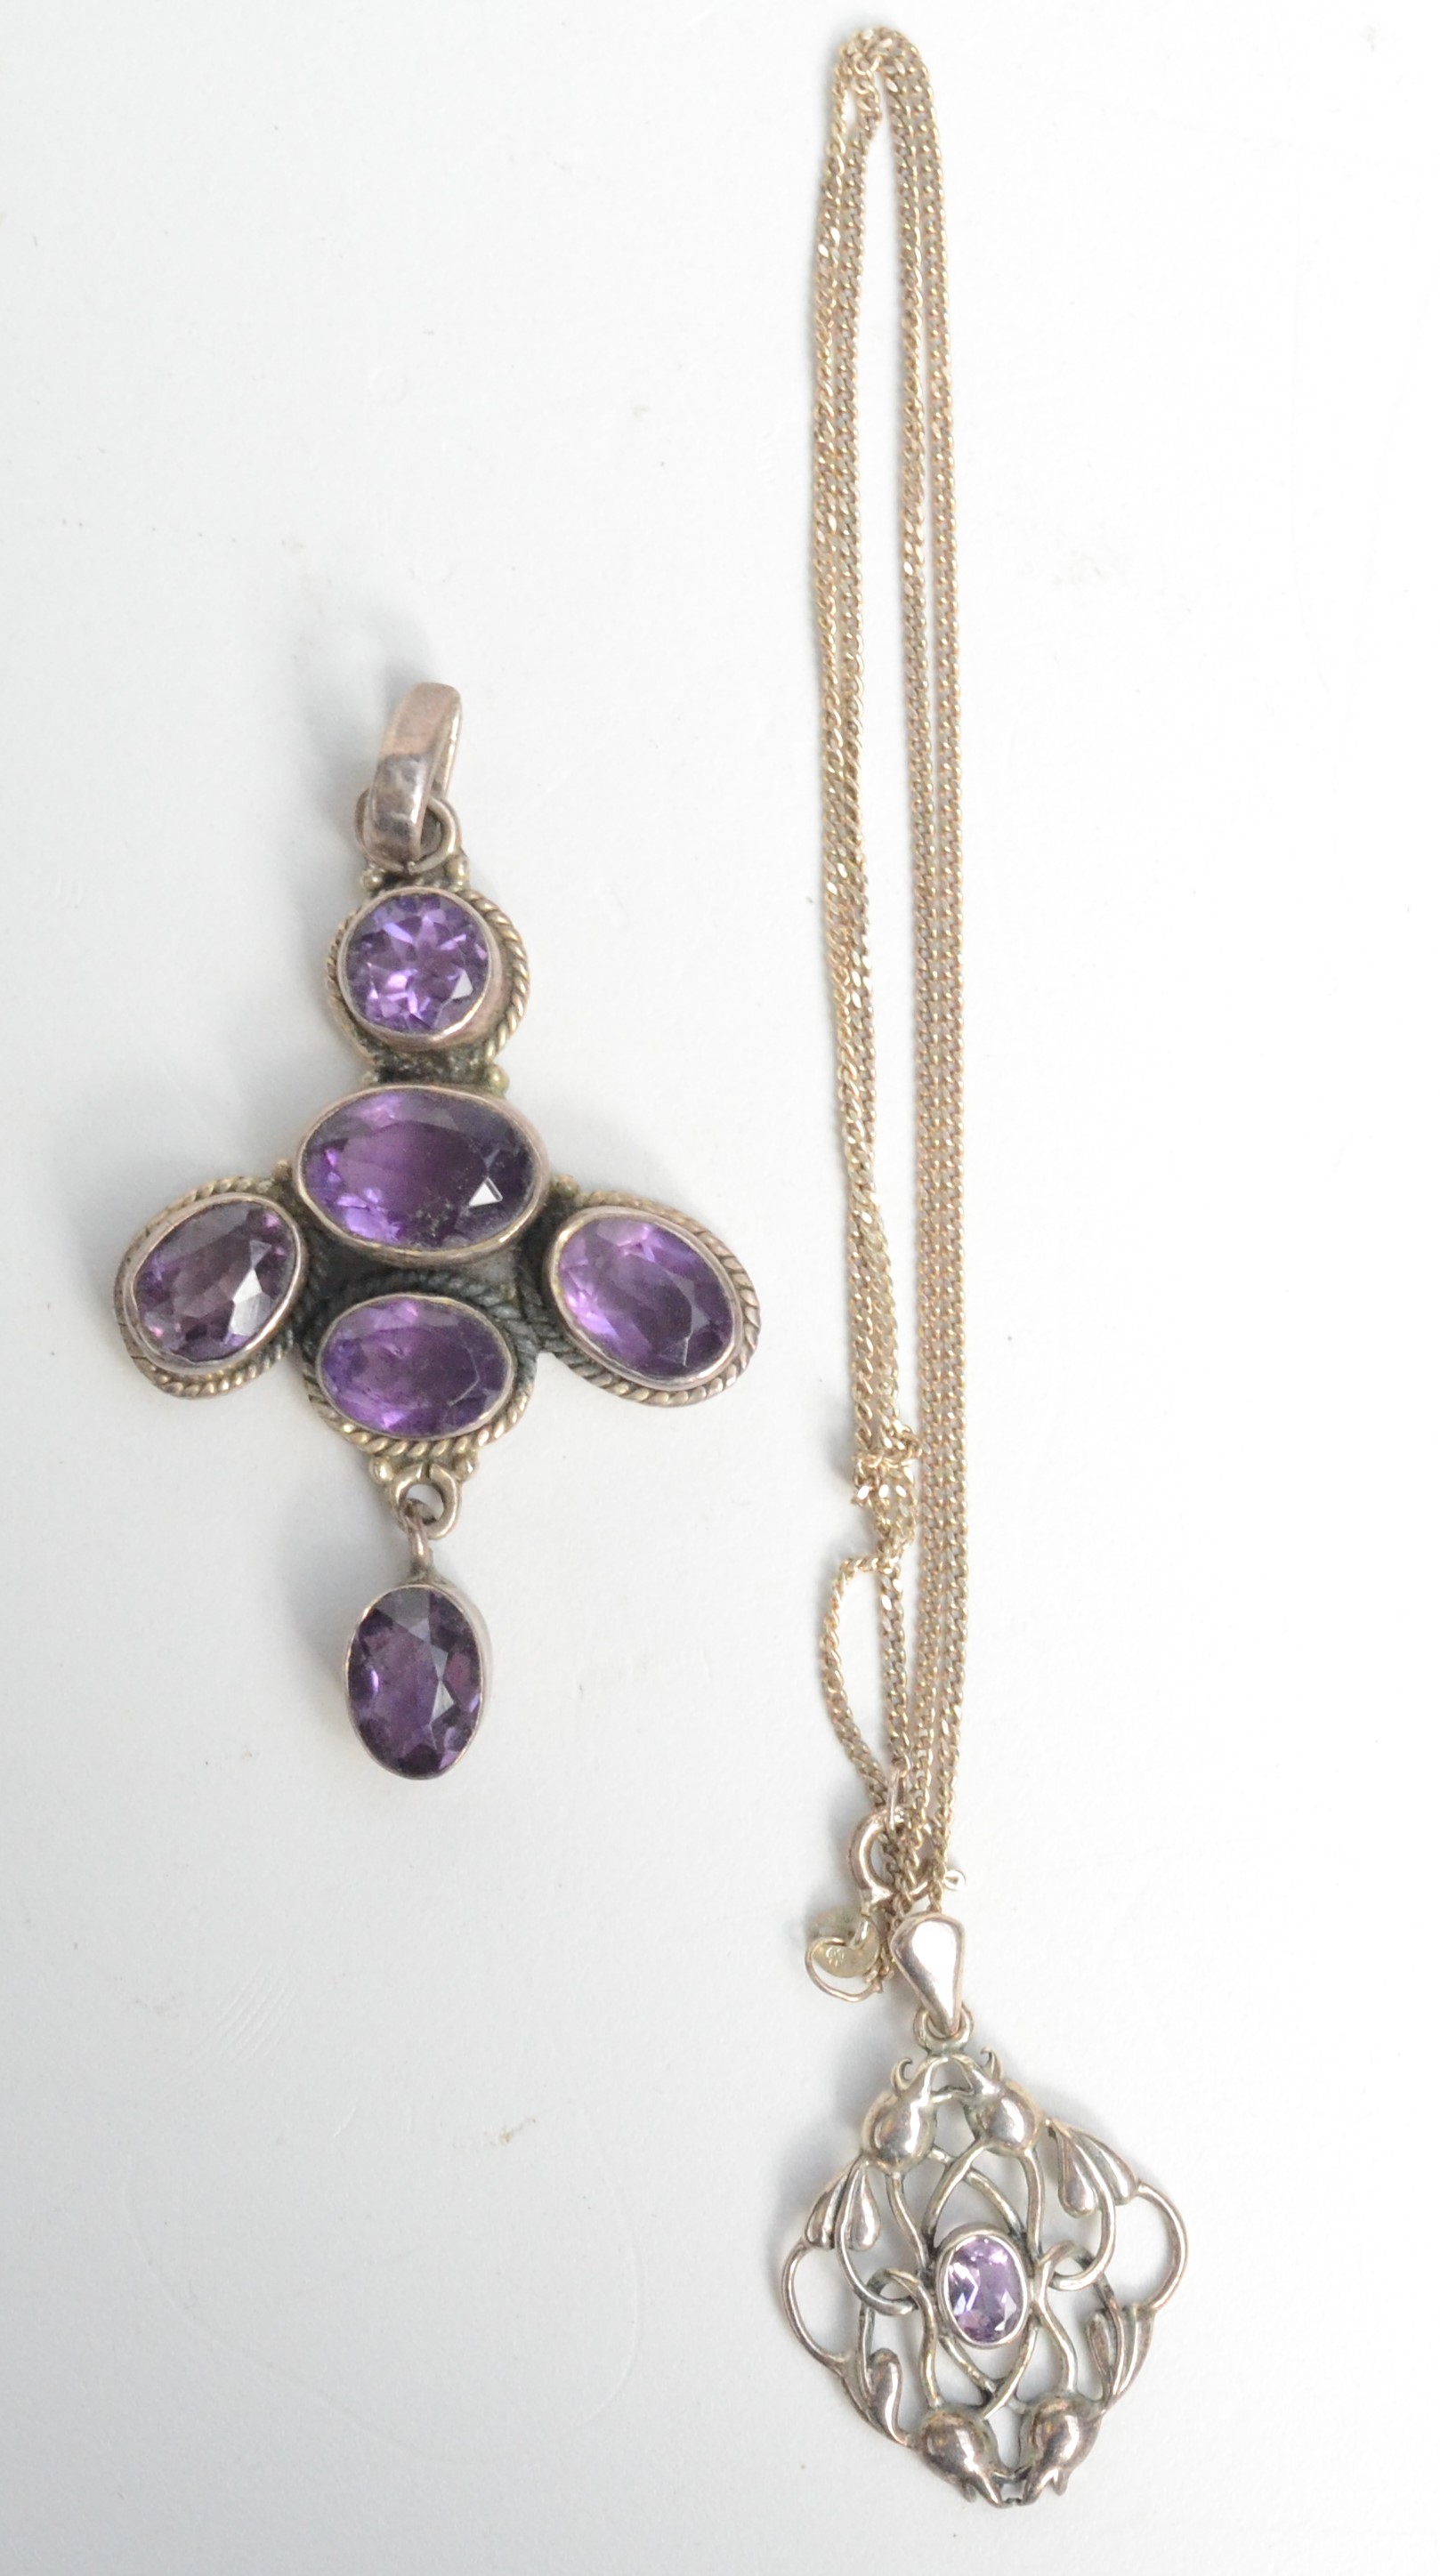 An Arts and Crafts style silver pendant set amethyst and one other amethyst and silver pendant.